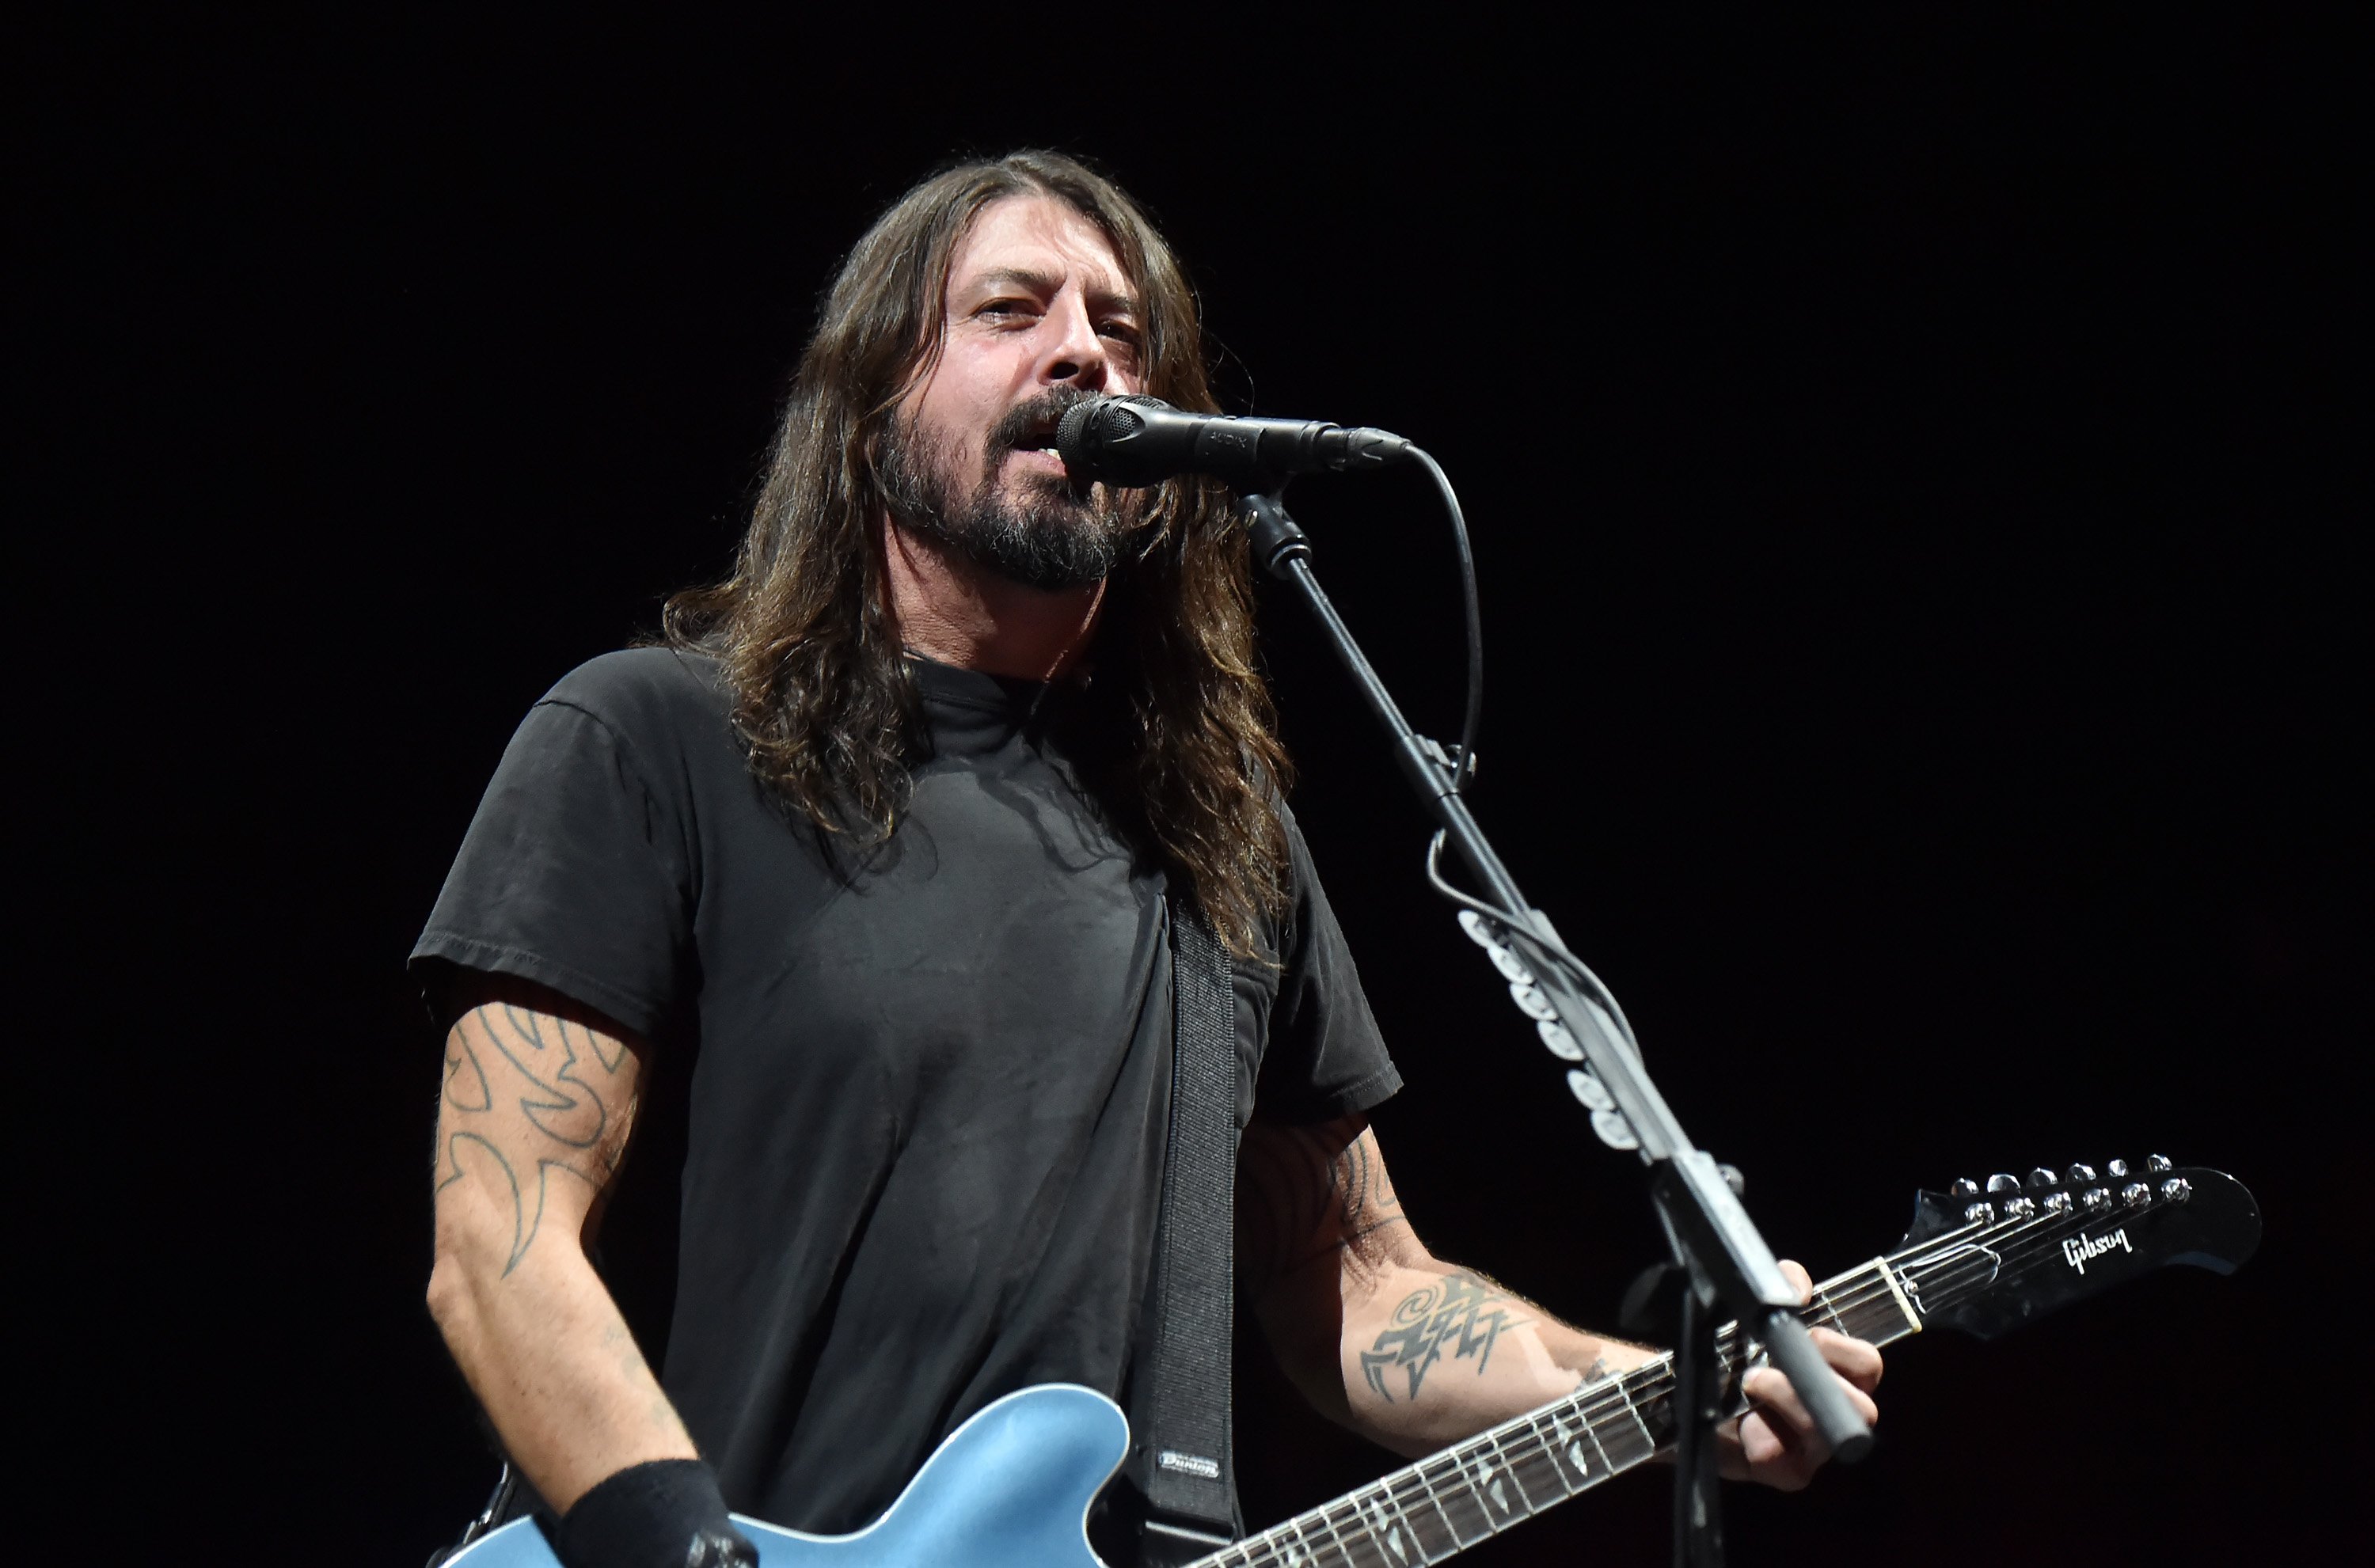 Dave Grohl performs onstage at Maracana on January 25, 2015 in Rio de Janeiro, Brazil. | Photo: Getty Images